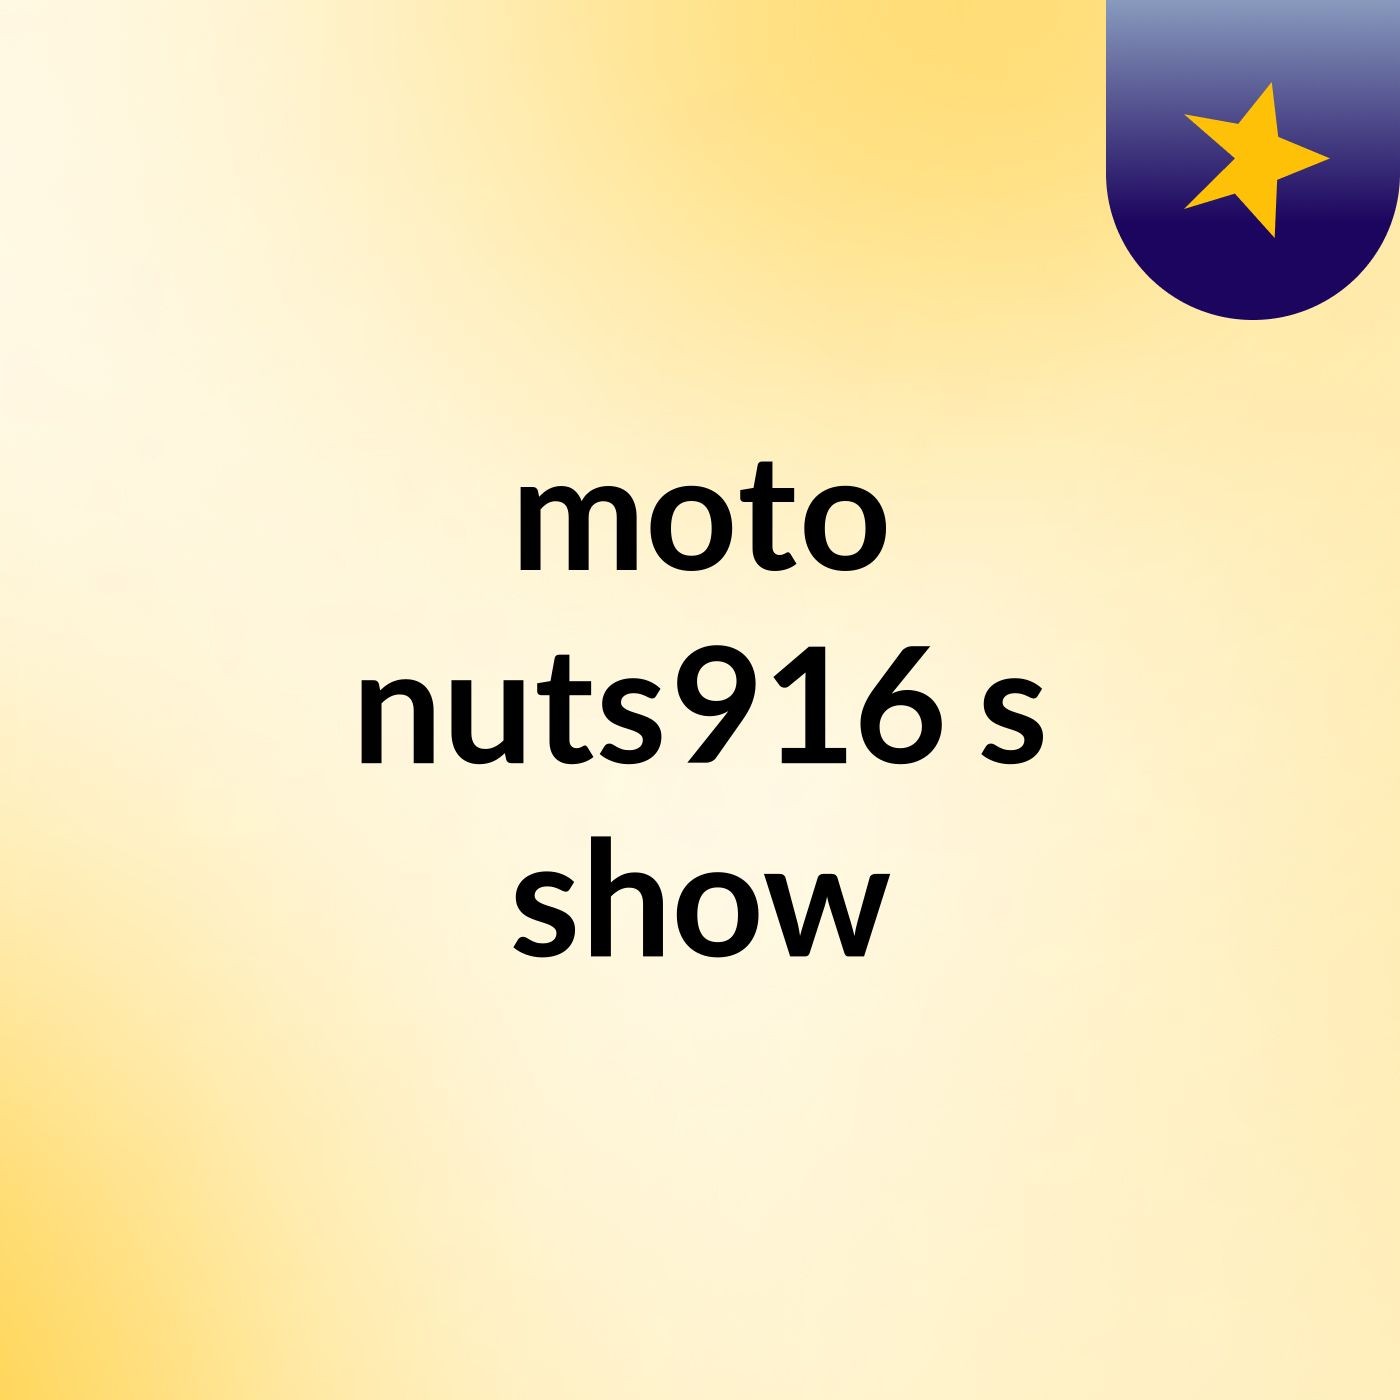 moto nuts916's show